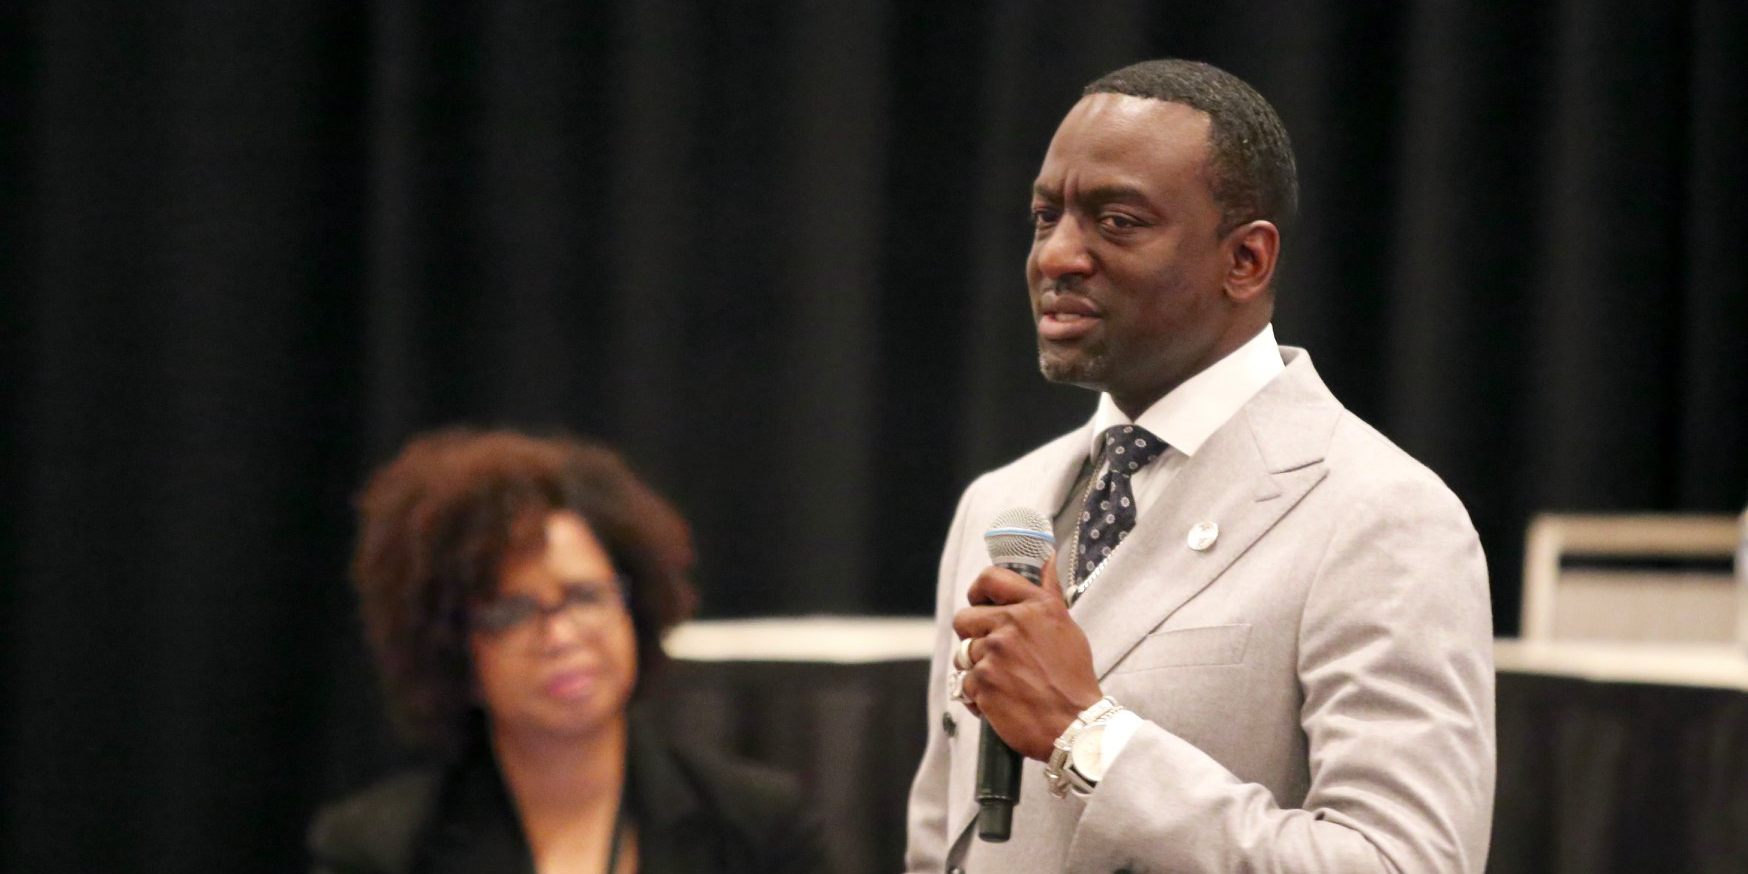 At the Conscience and Justice Council Conference, Yusef Salaam speaks about his experience of being wrongly accused of the 1989 beating a New York City jogger.  | photo credit: D.L. McPhaull